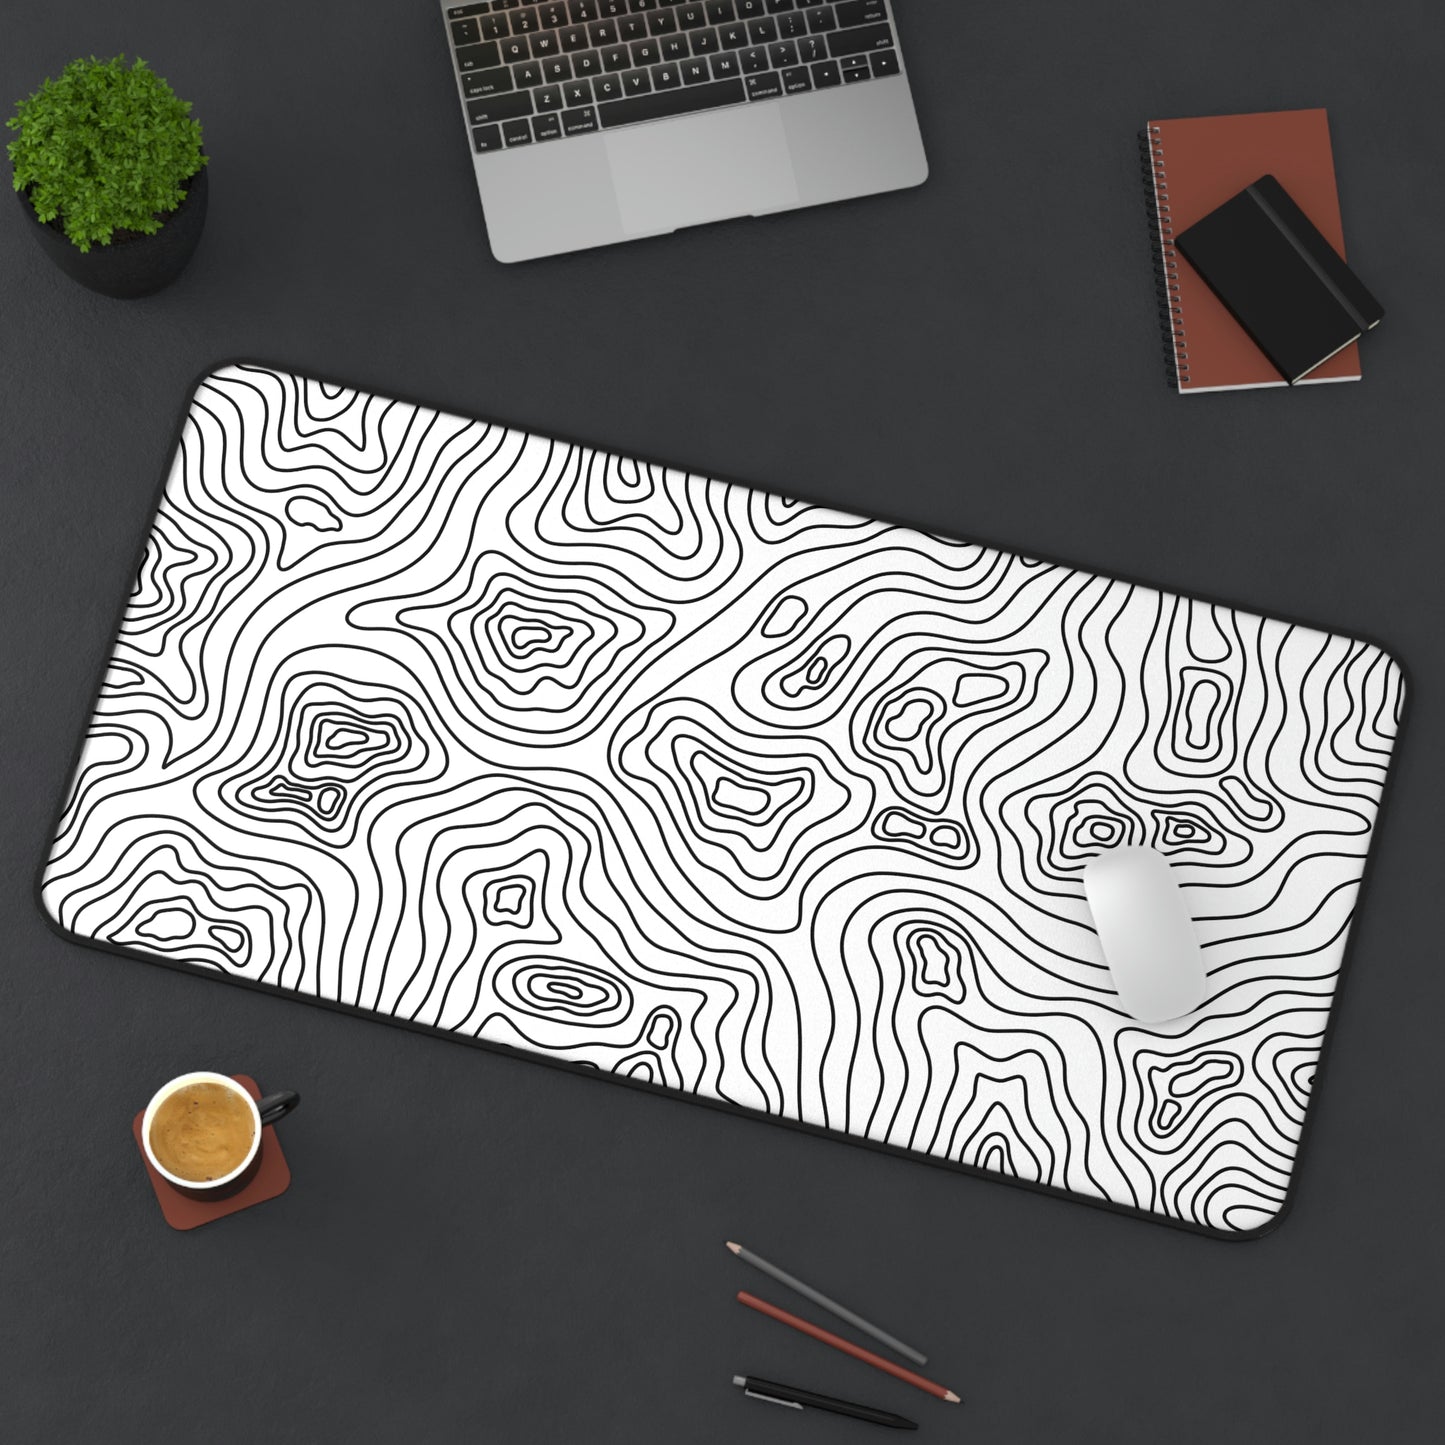 A 31" x 15.5" white desk mat with black topographic lines sits at an angle. A mouse sits on top of it.